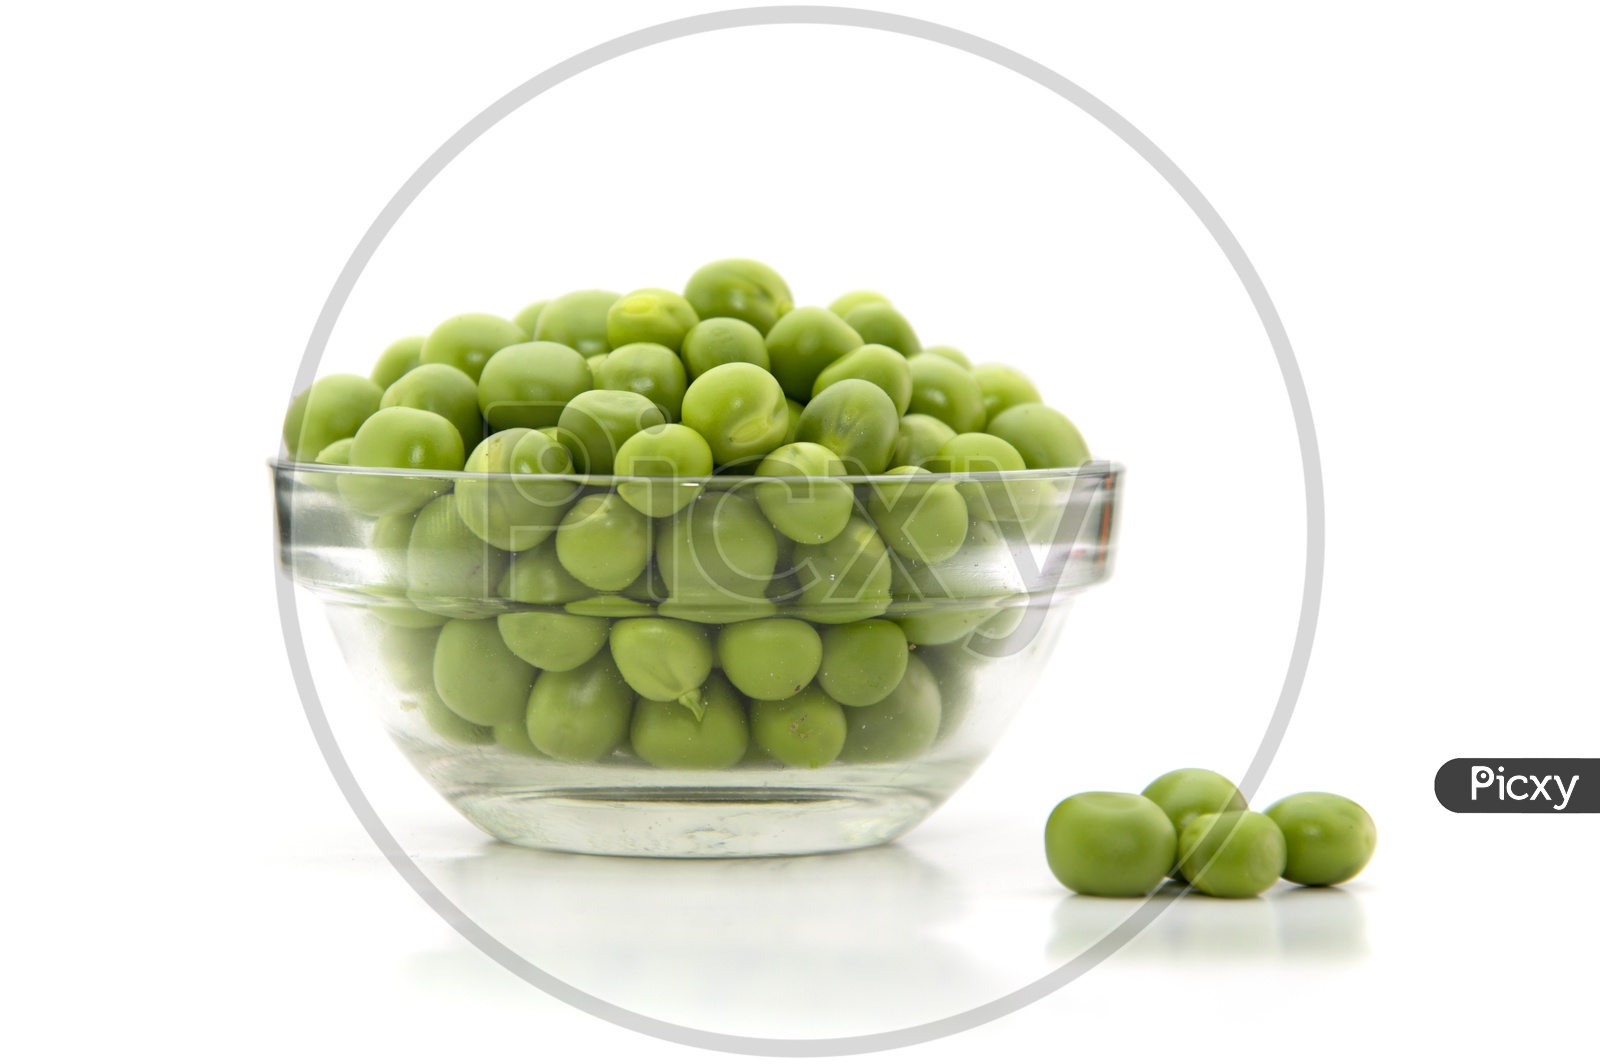 Fresh Green Peas In A Bowl On an Isolated White Background